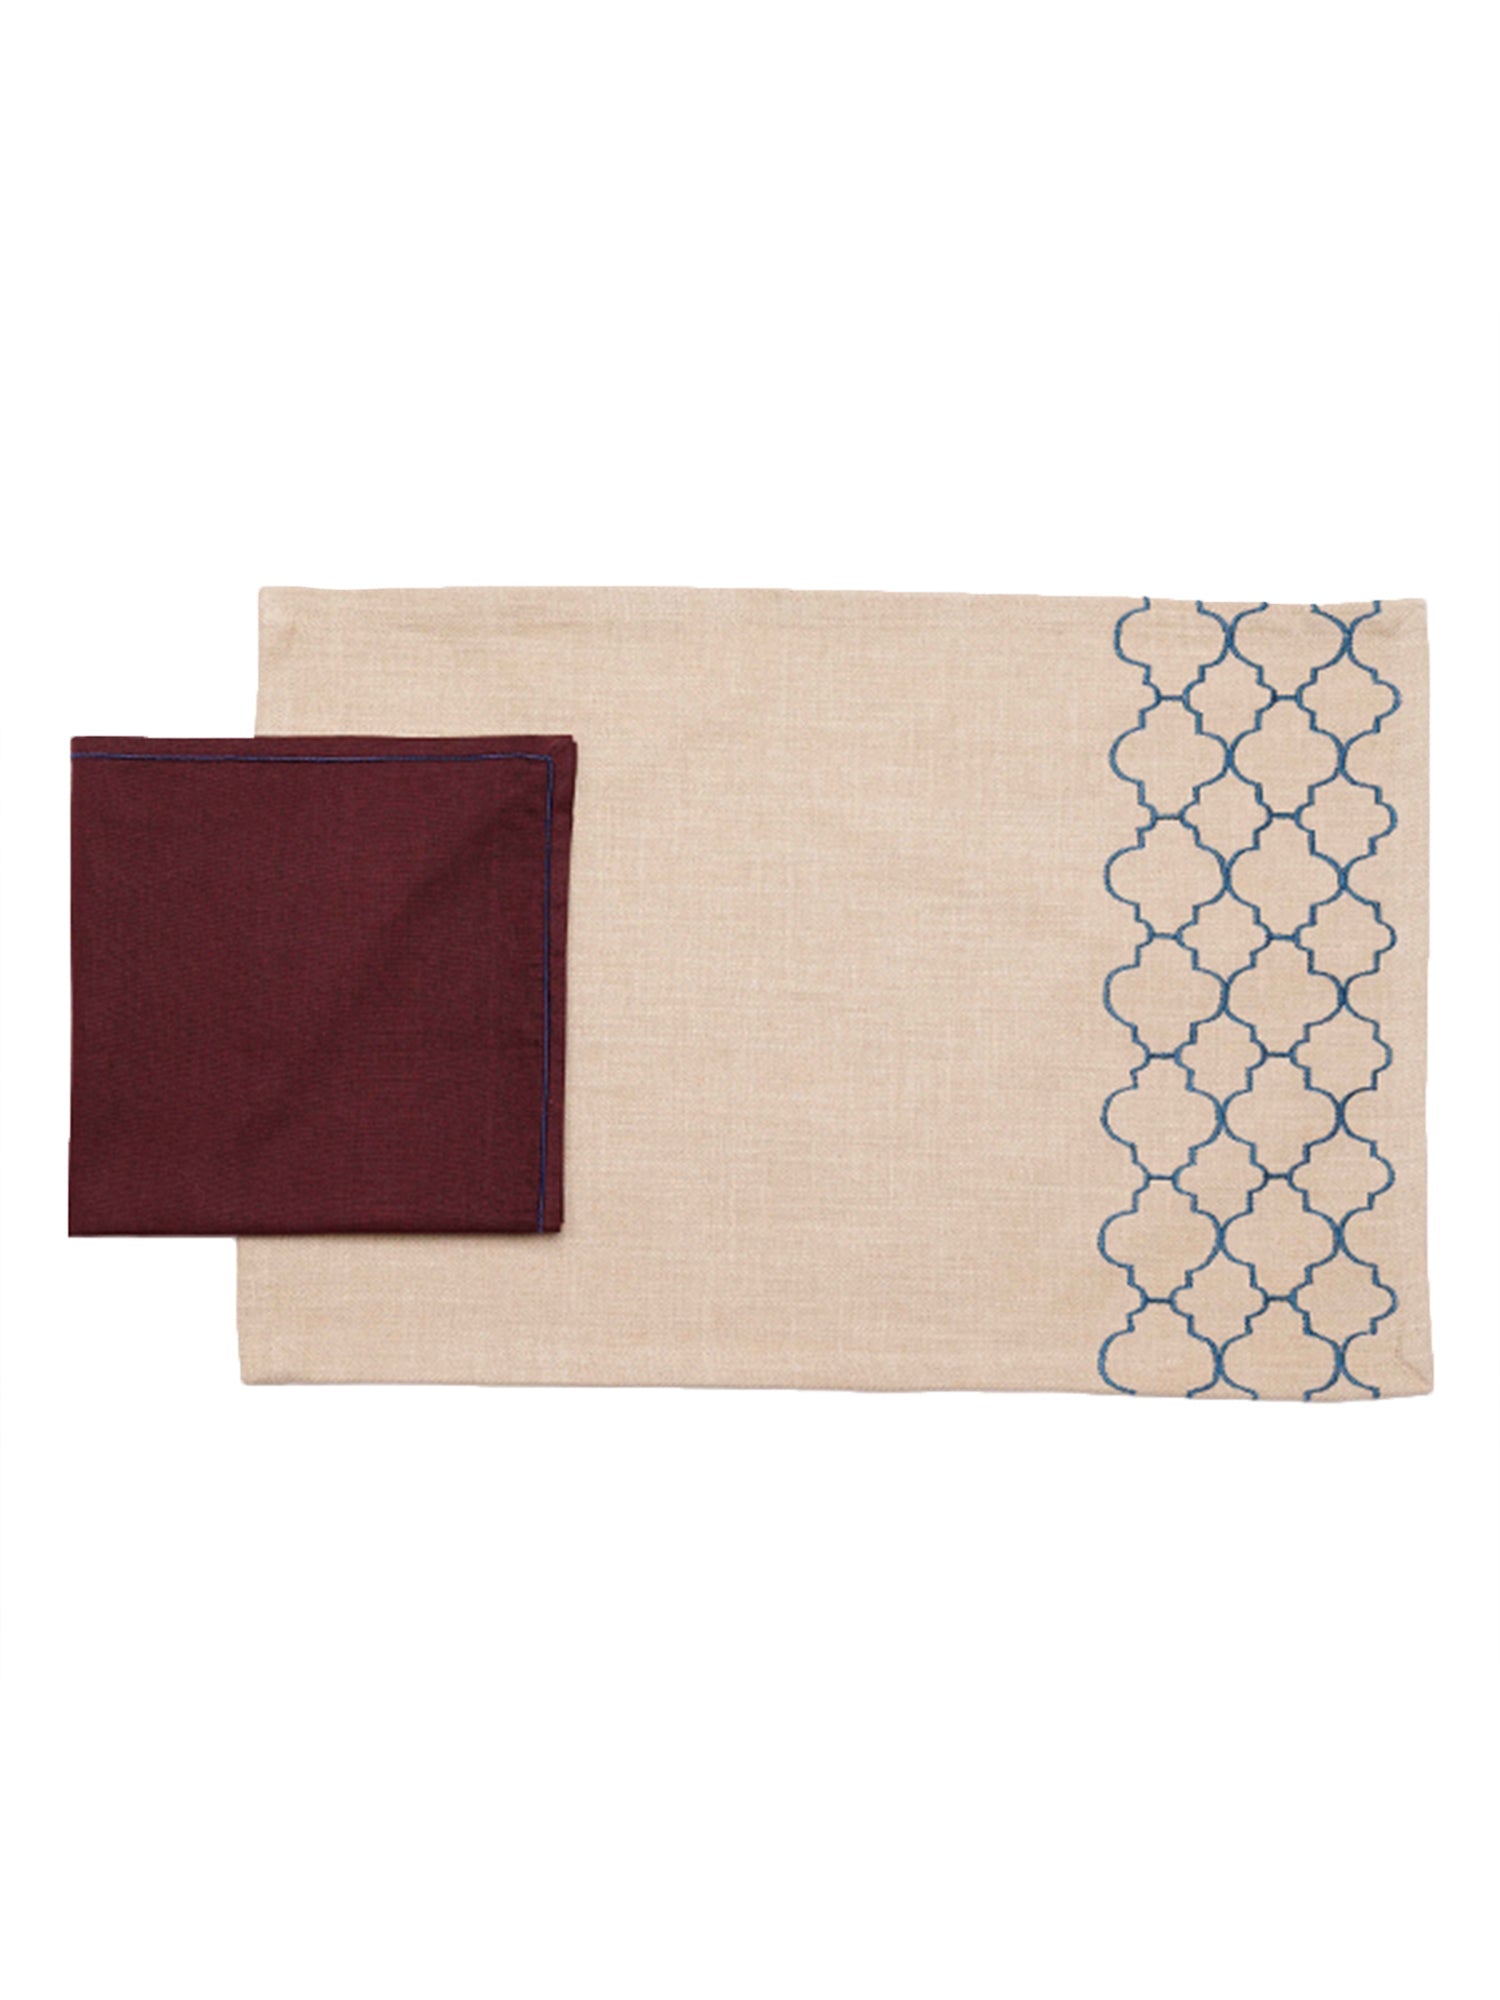 embroidered dinner table placemats and embroidered napkins in beige and dark brown color - 13x19 inch 